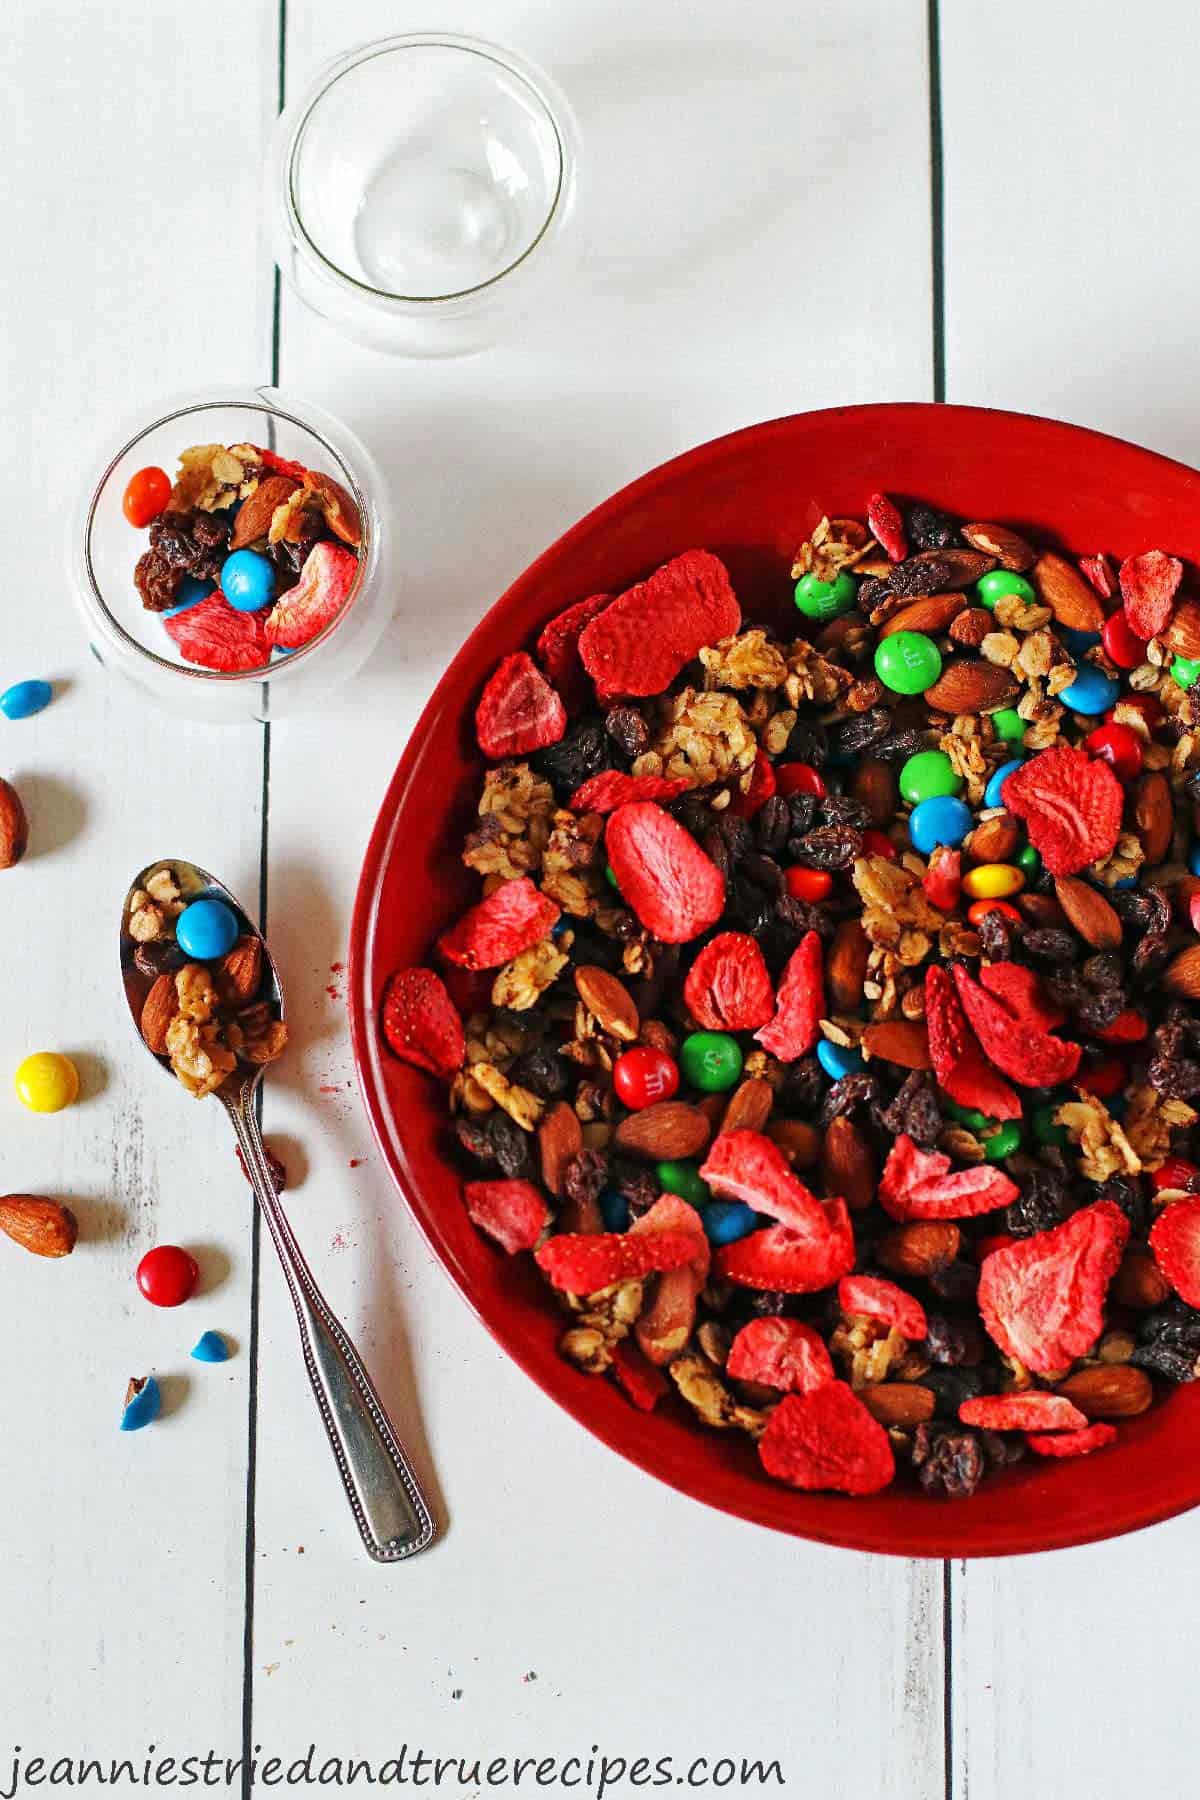 Homemade trail mix in a red bowl